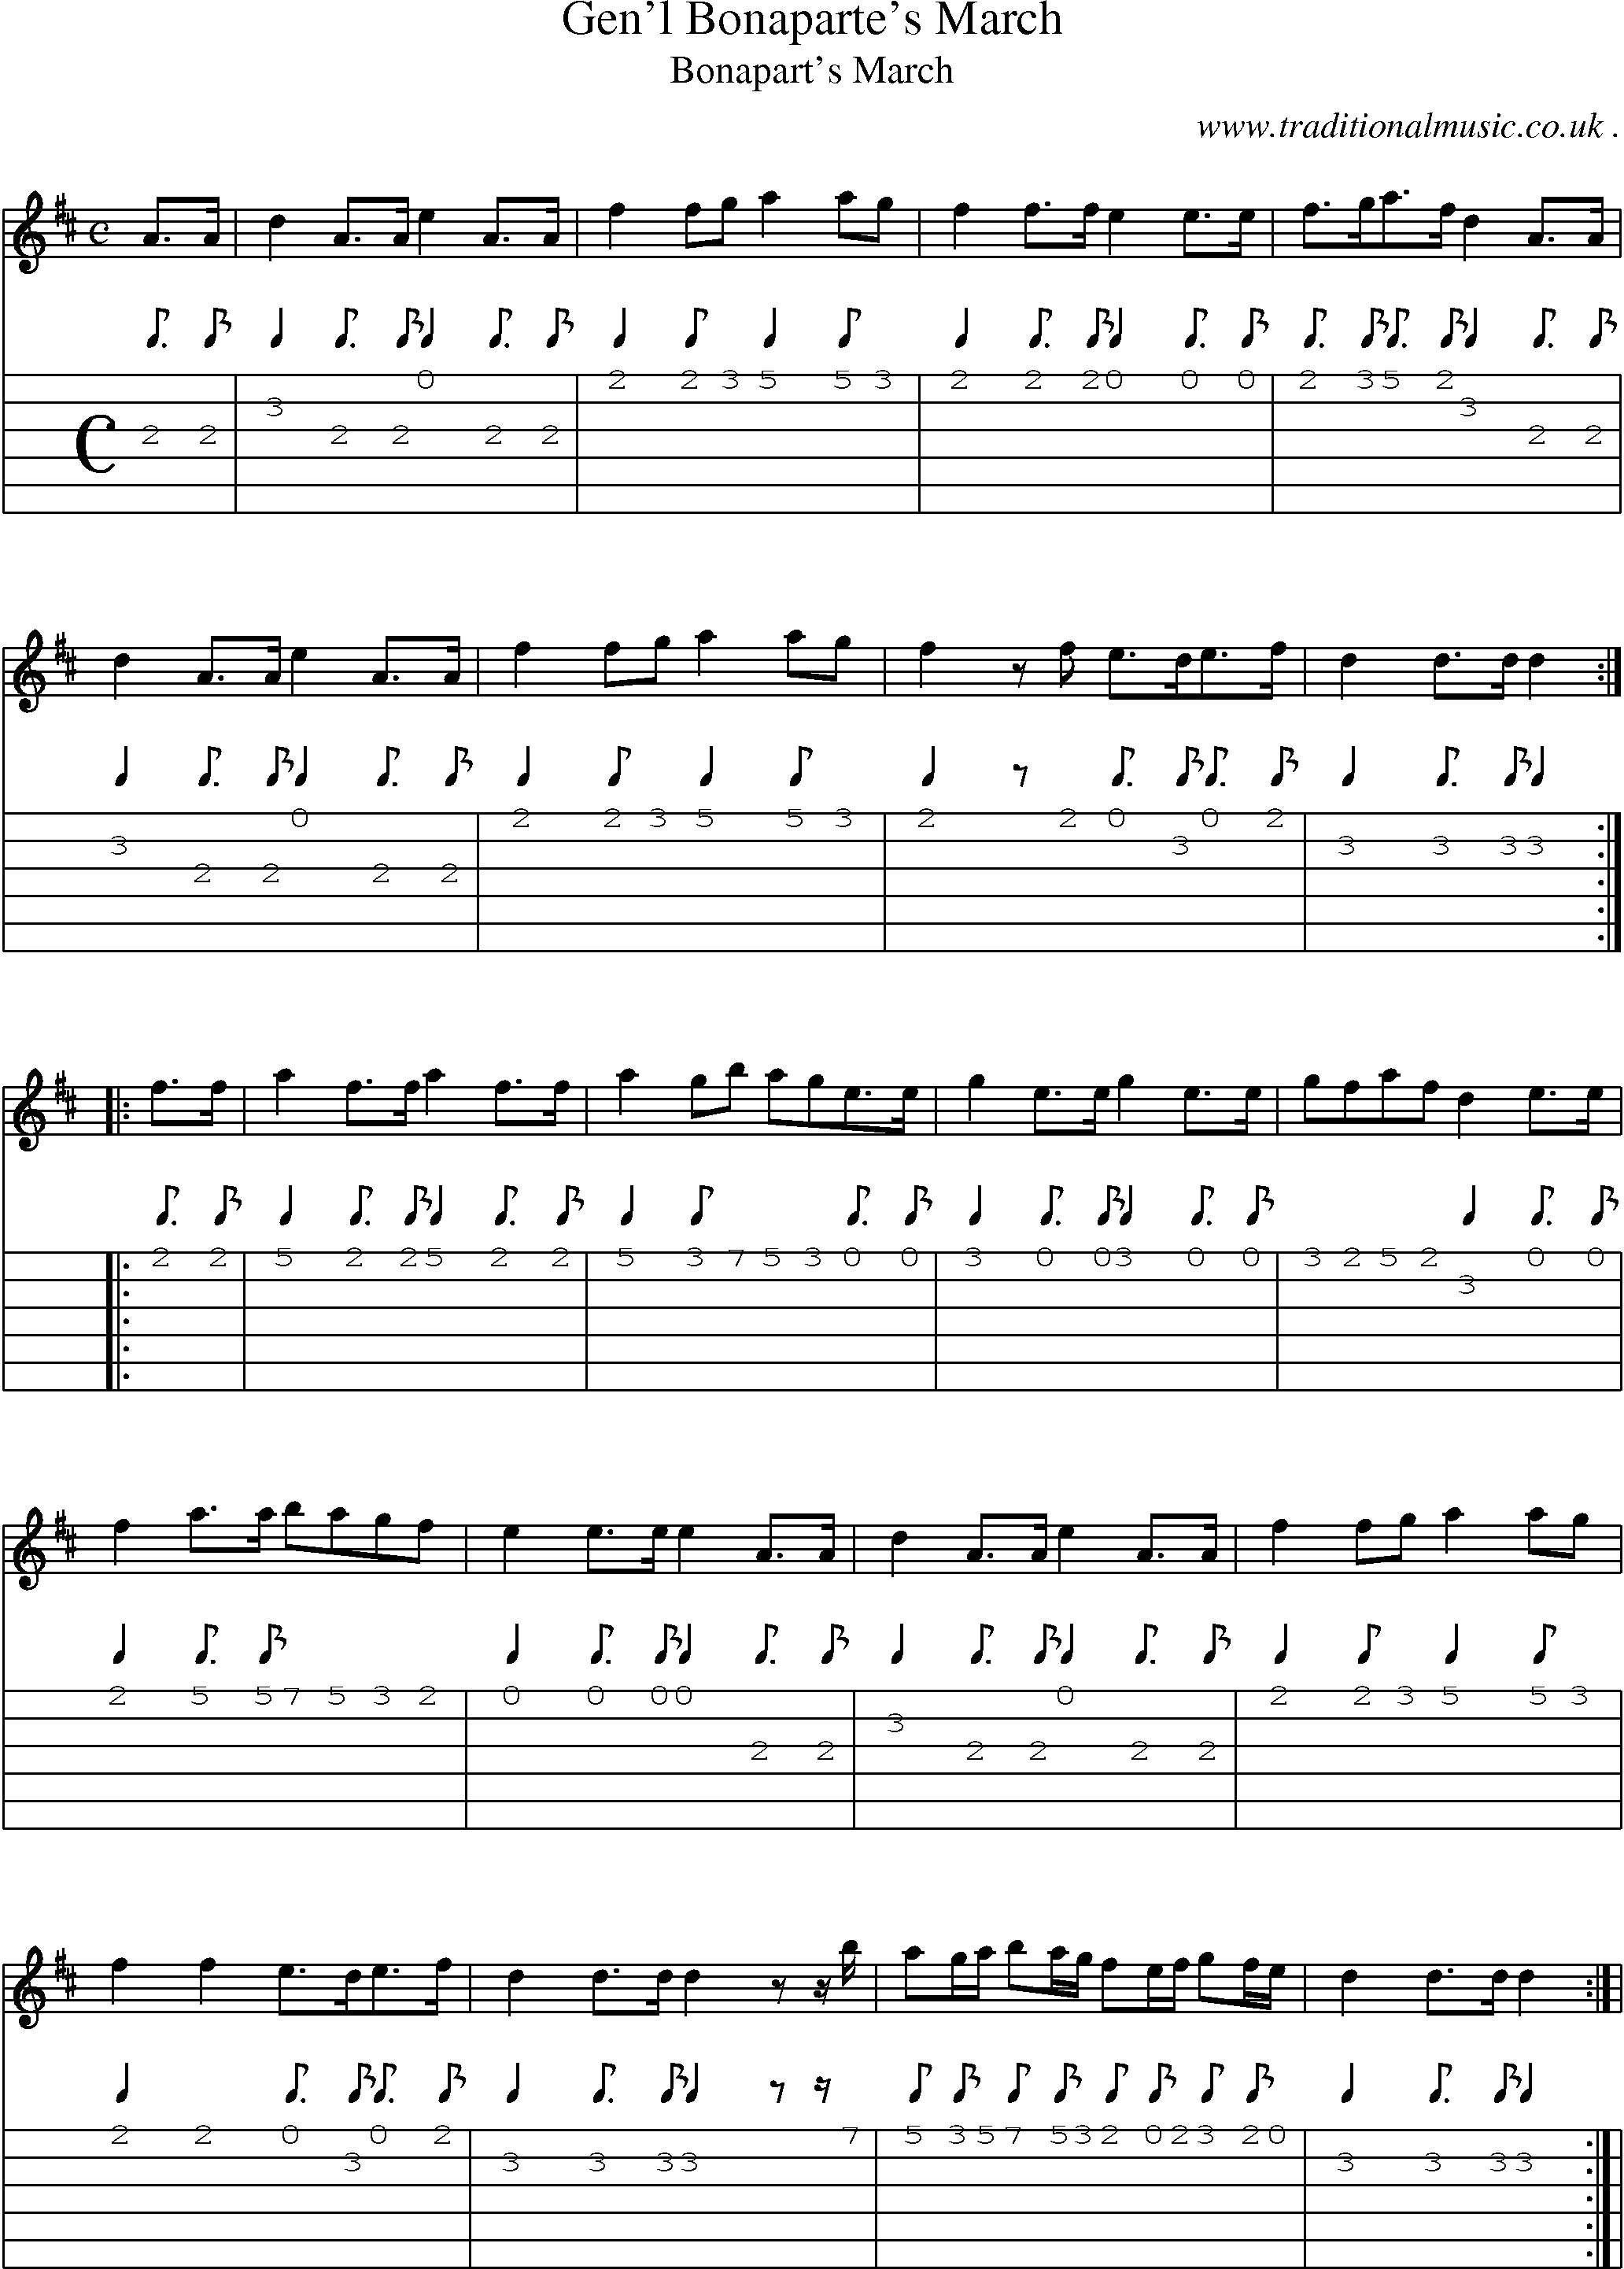 Sheet-Music and Guitar Tabs for Genl Bonapartes March